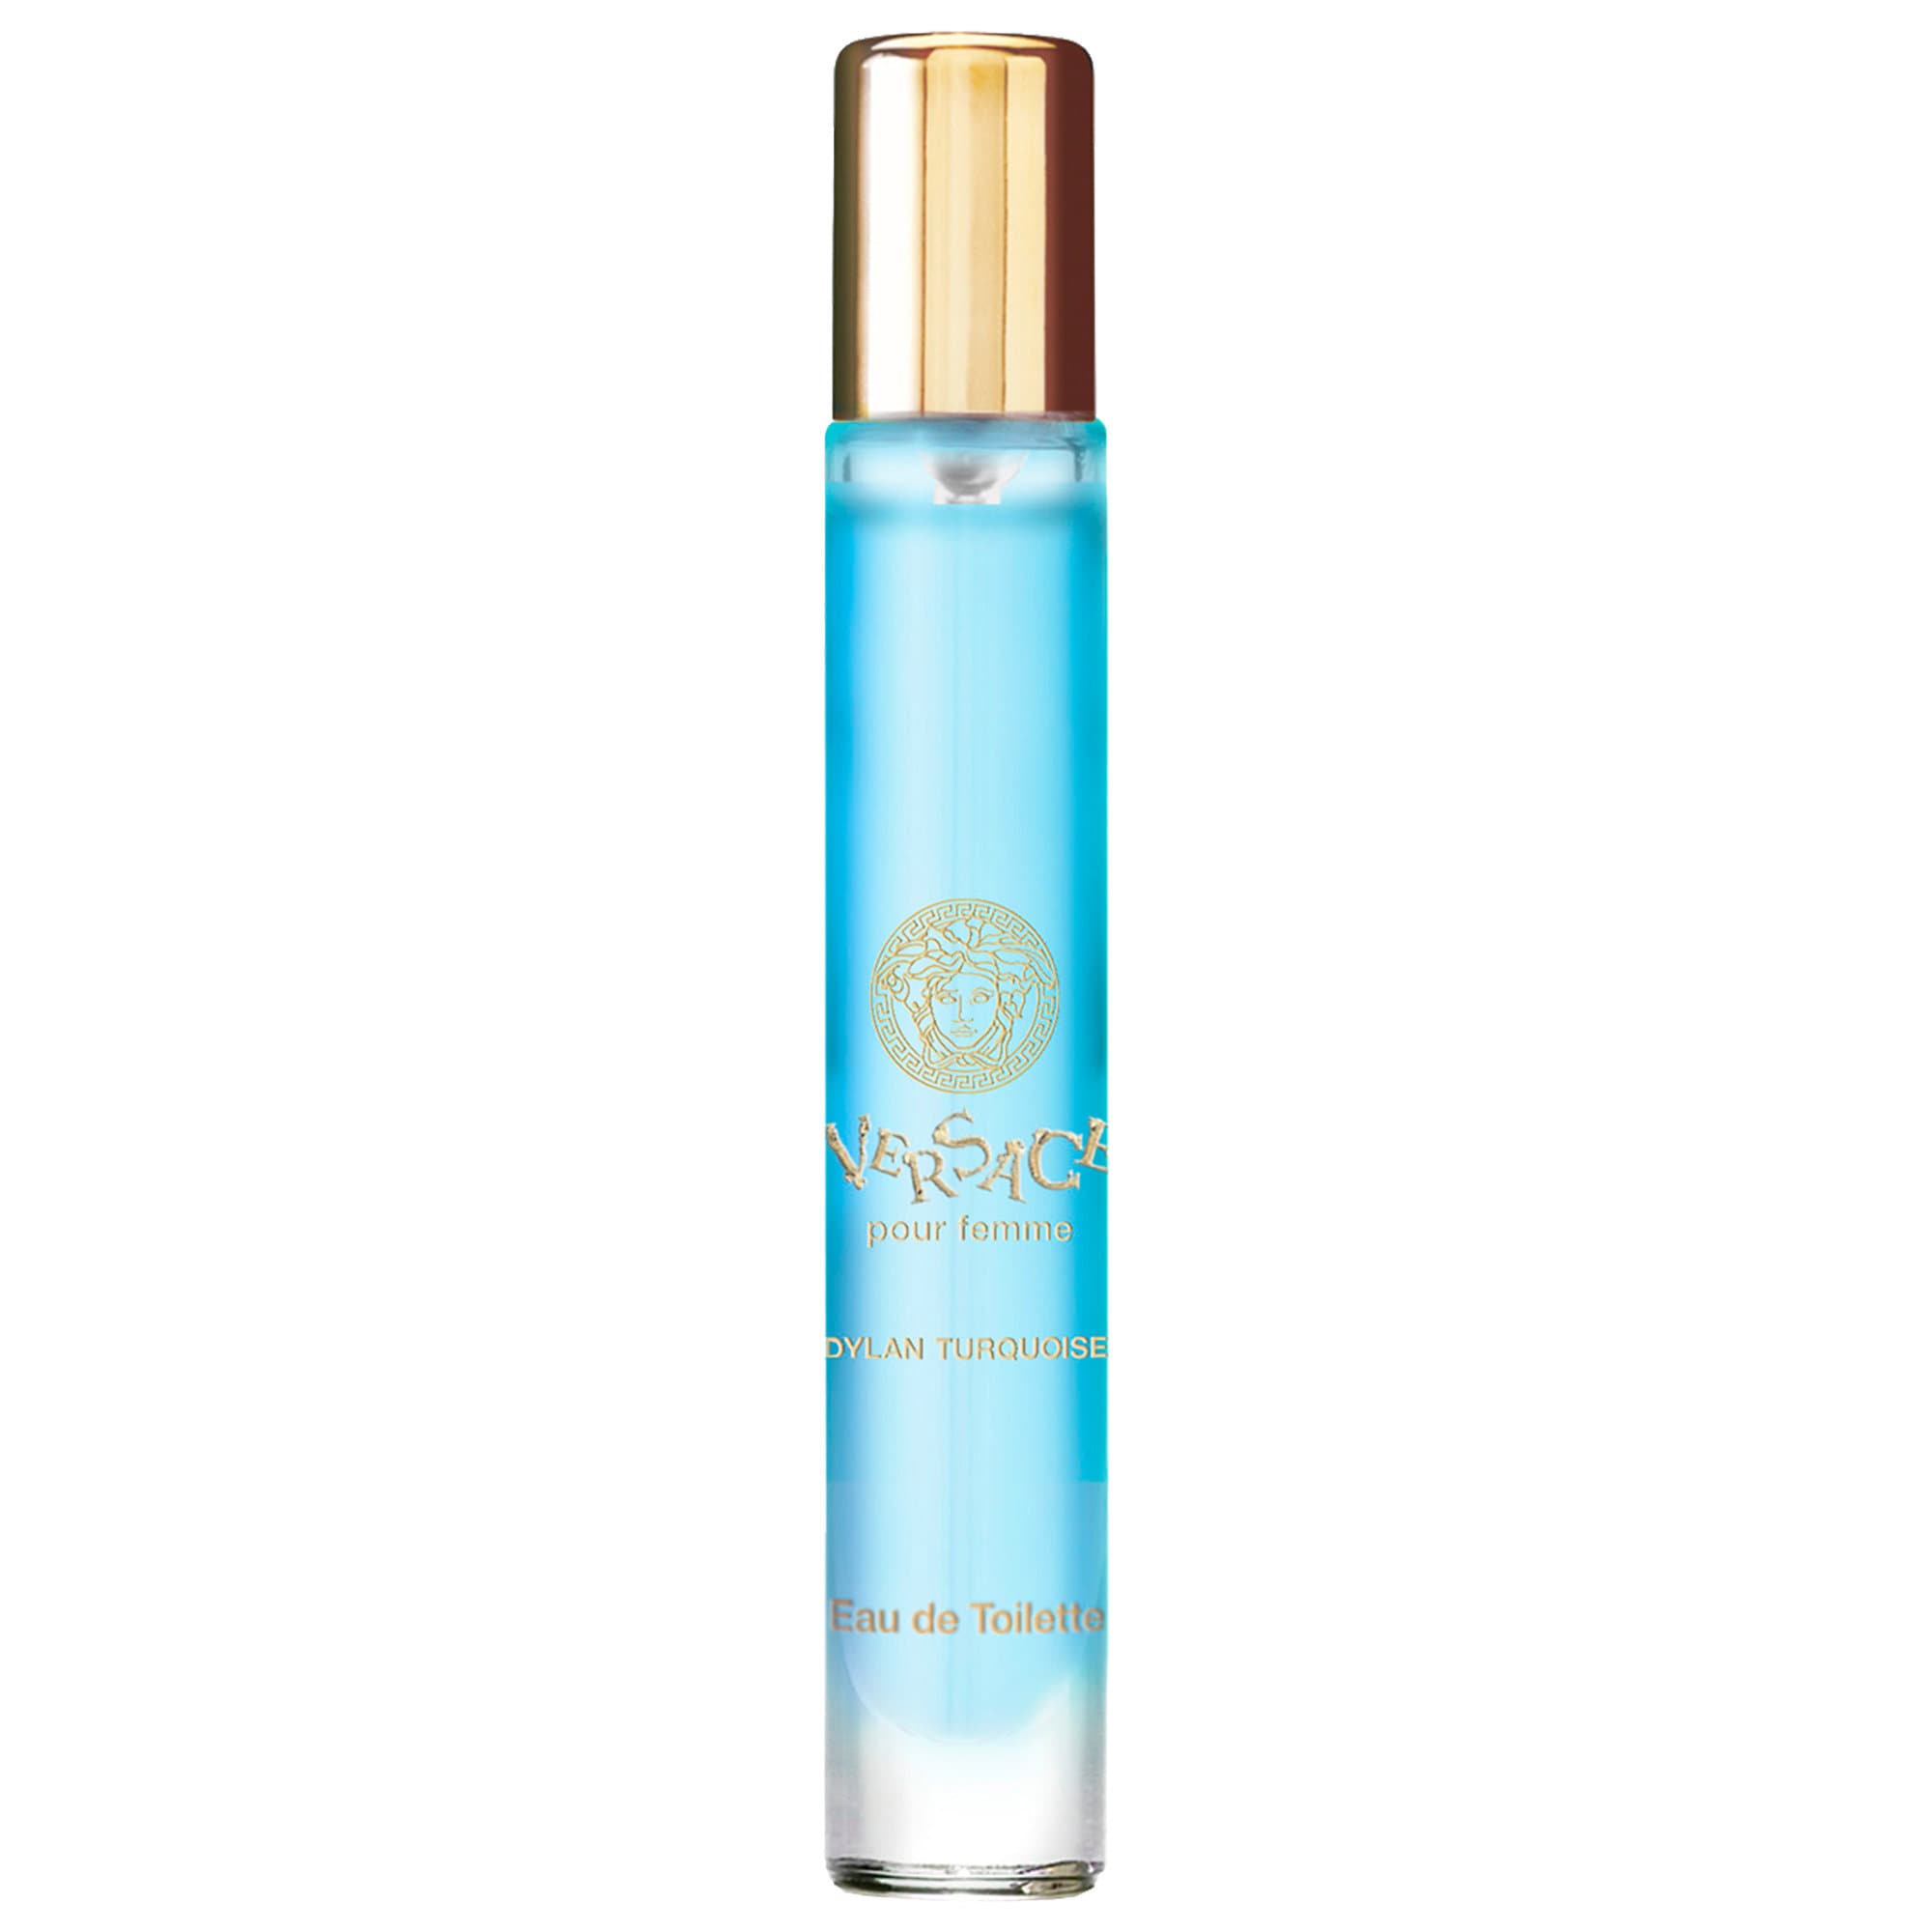 Dylan Turquoise Pour Femme Travel Spray Versace